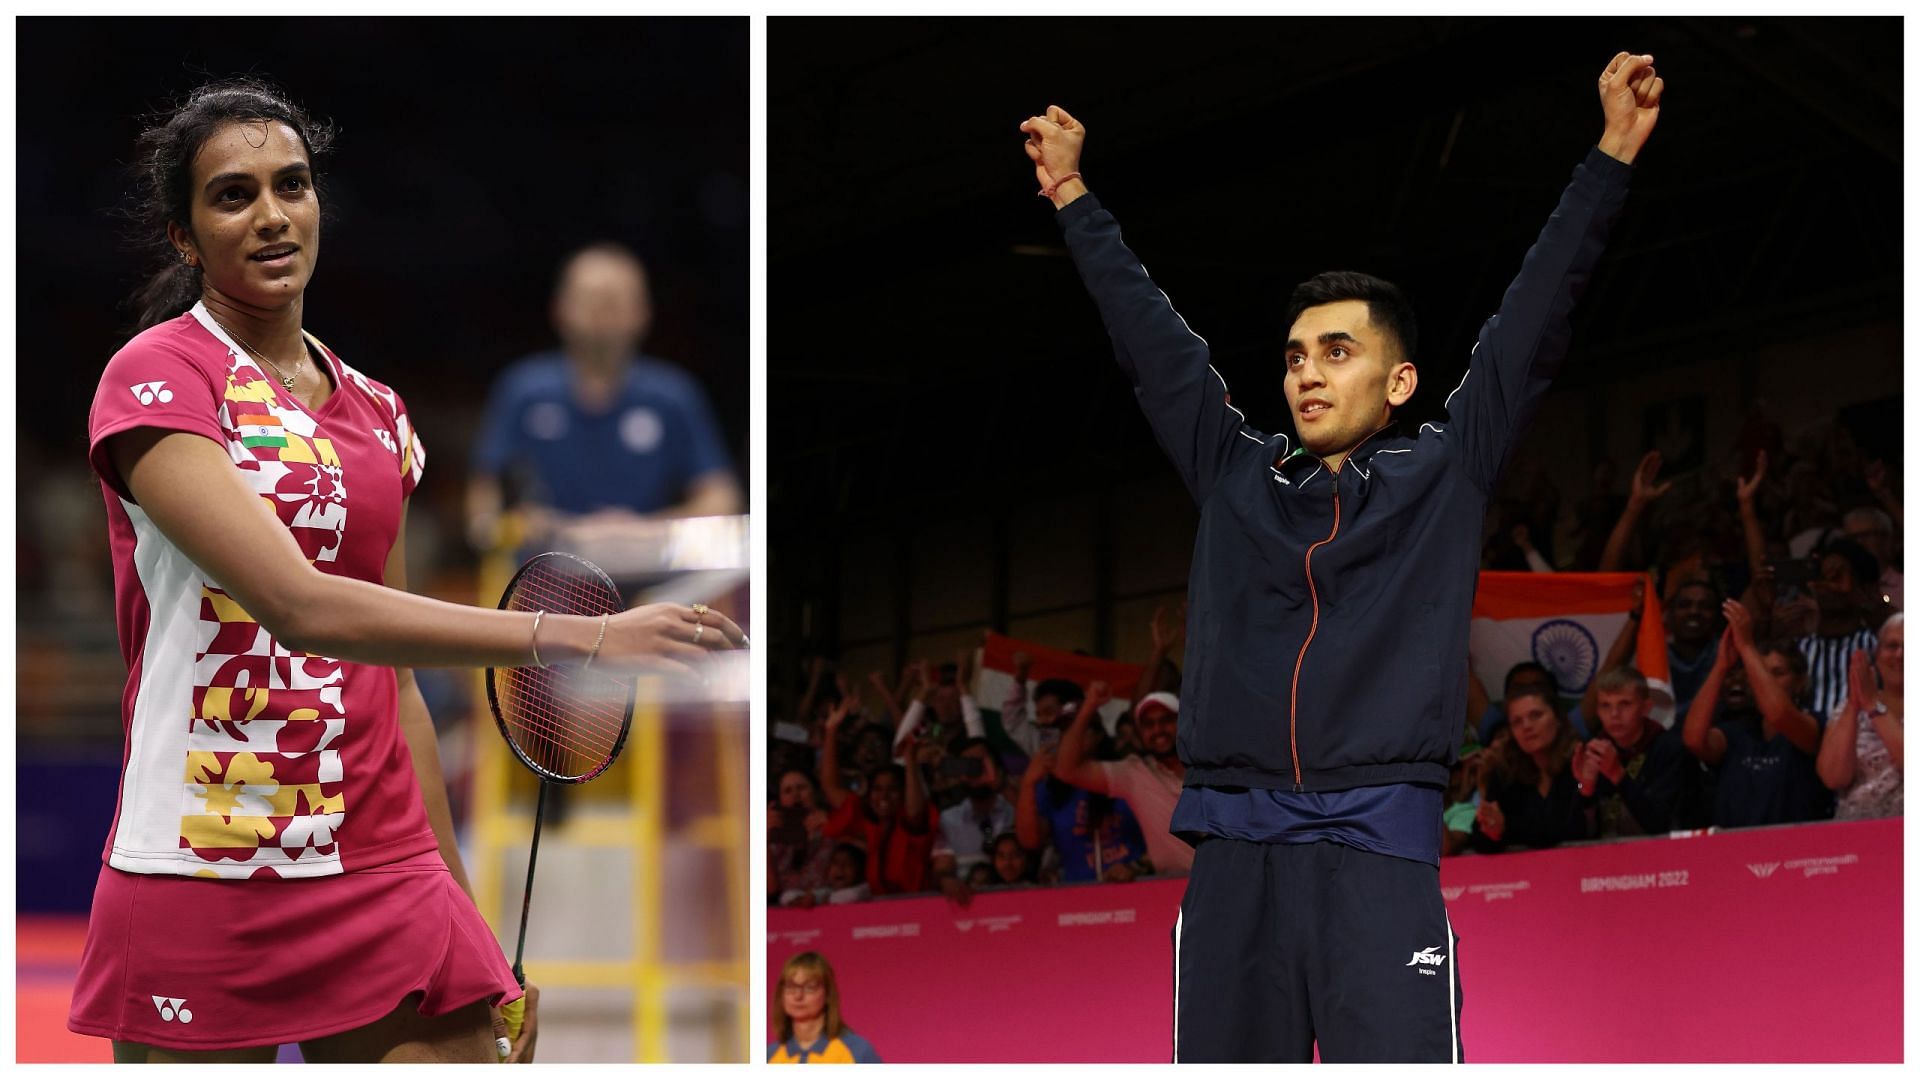 PV Sindhu (L) and Lakshya Sen were recently in action at the 2023 US Open Super 300 badminton tournament.